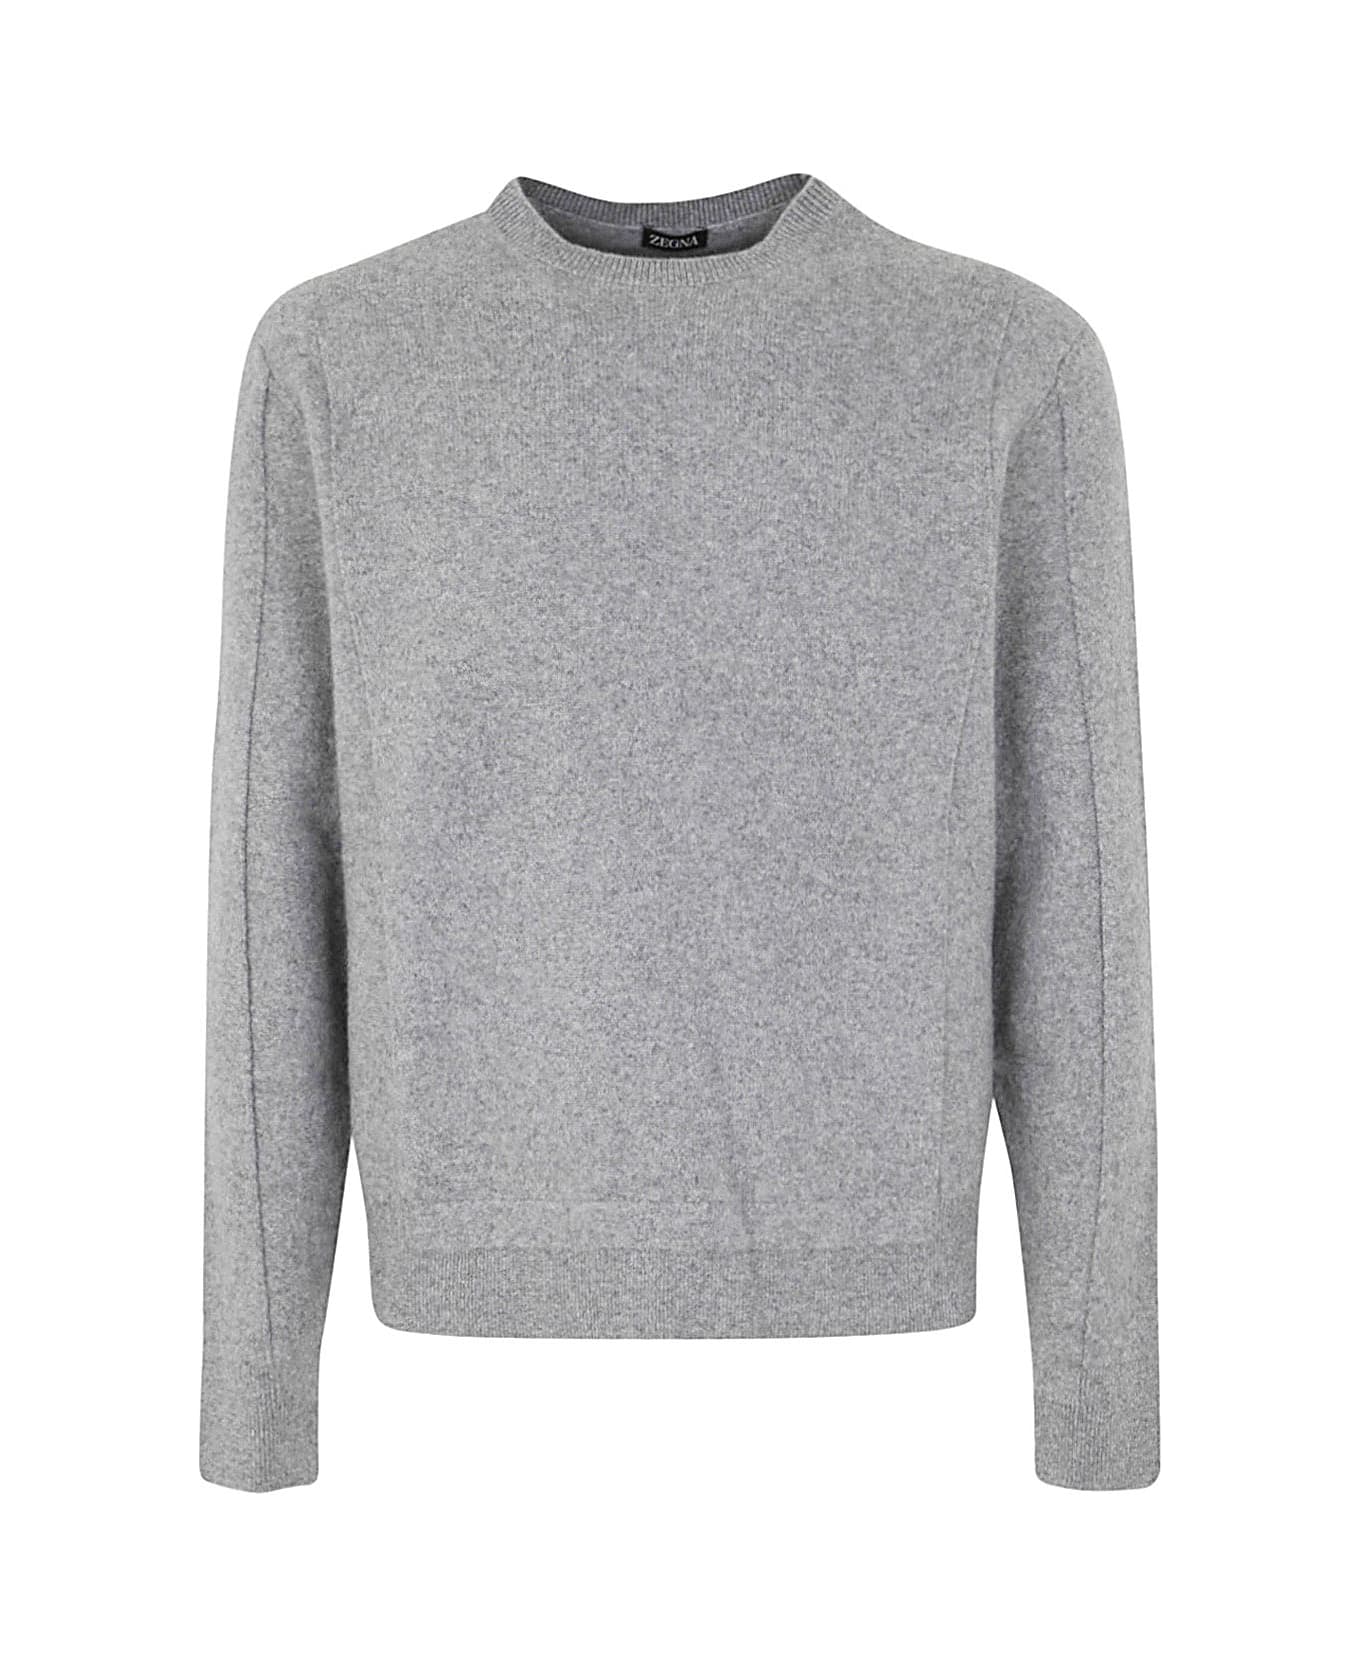 Zegna Wool And Cashmere Crew Neck Sweater - Grey